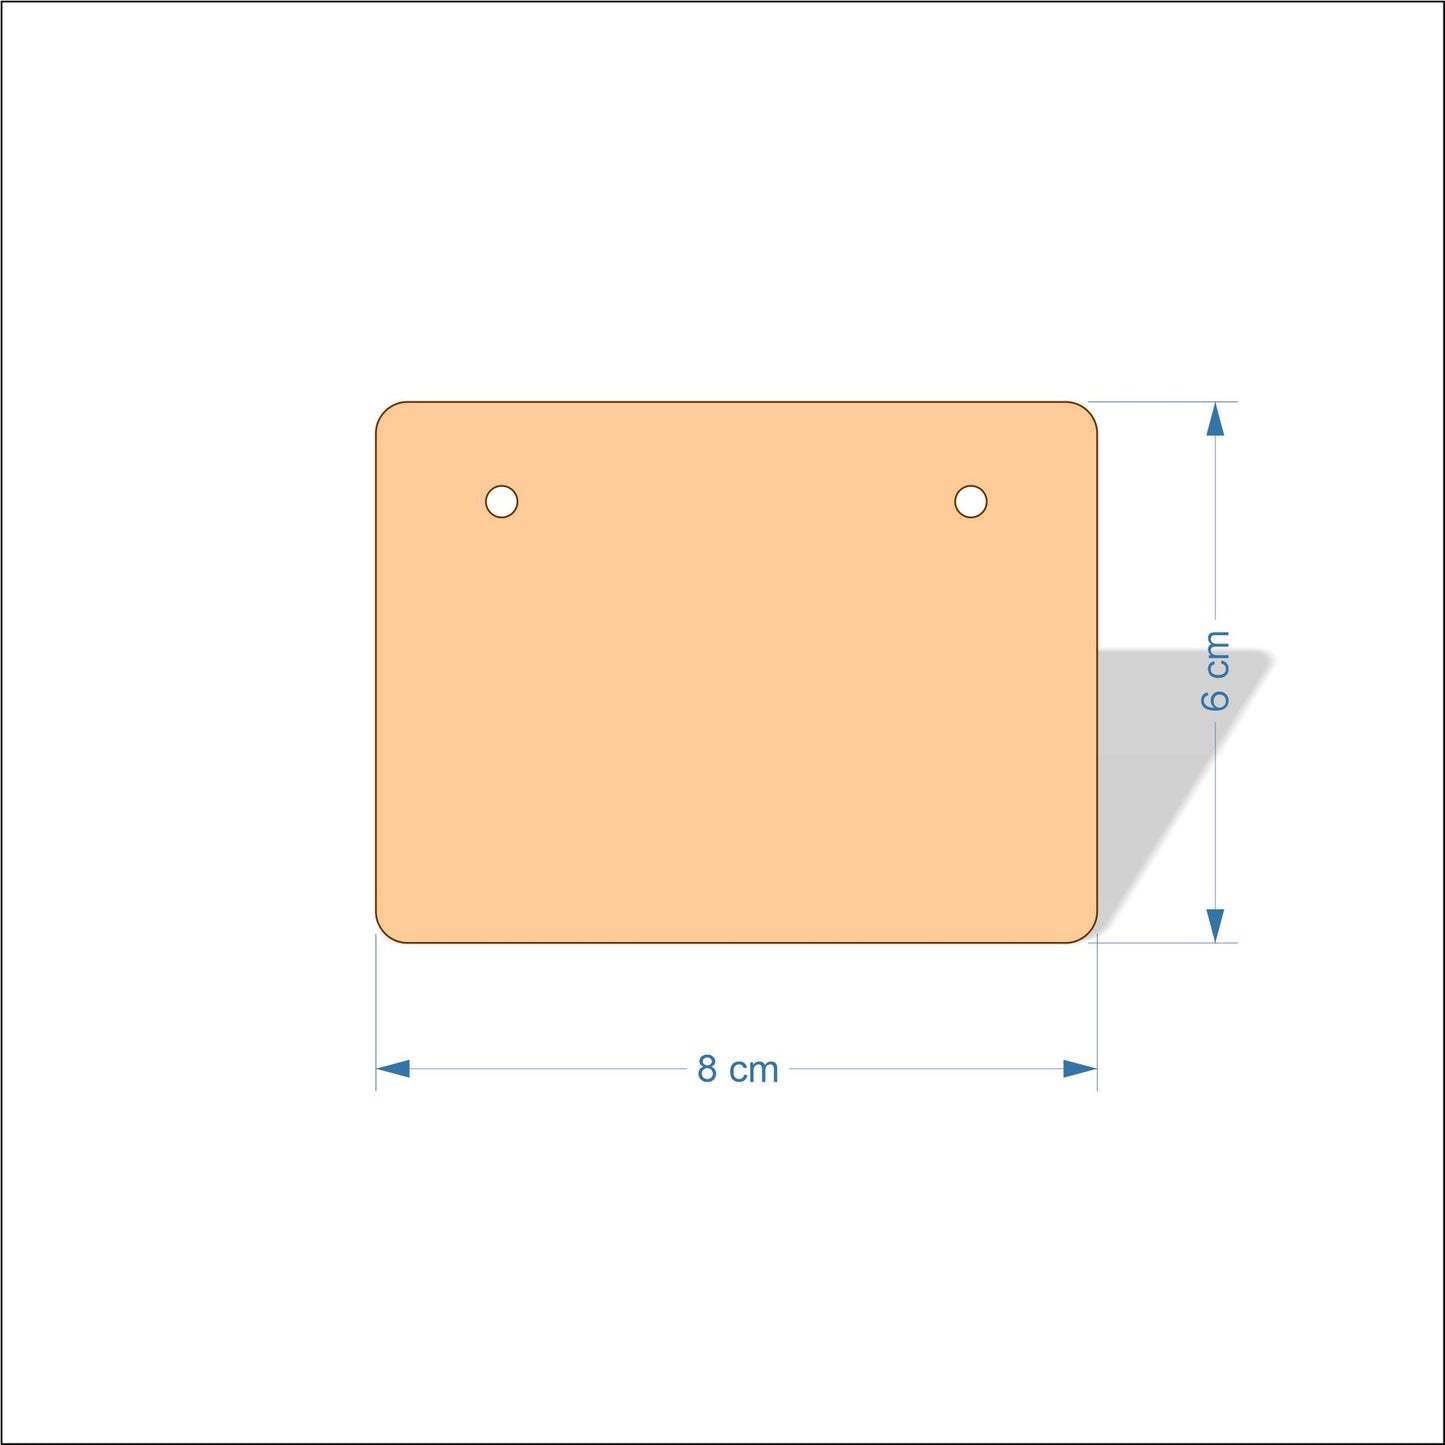 8 cm Wide 3mm thick MDF Plaques with rounded corners